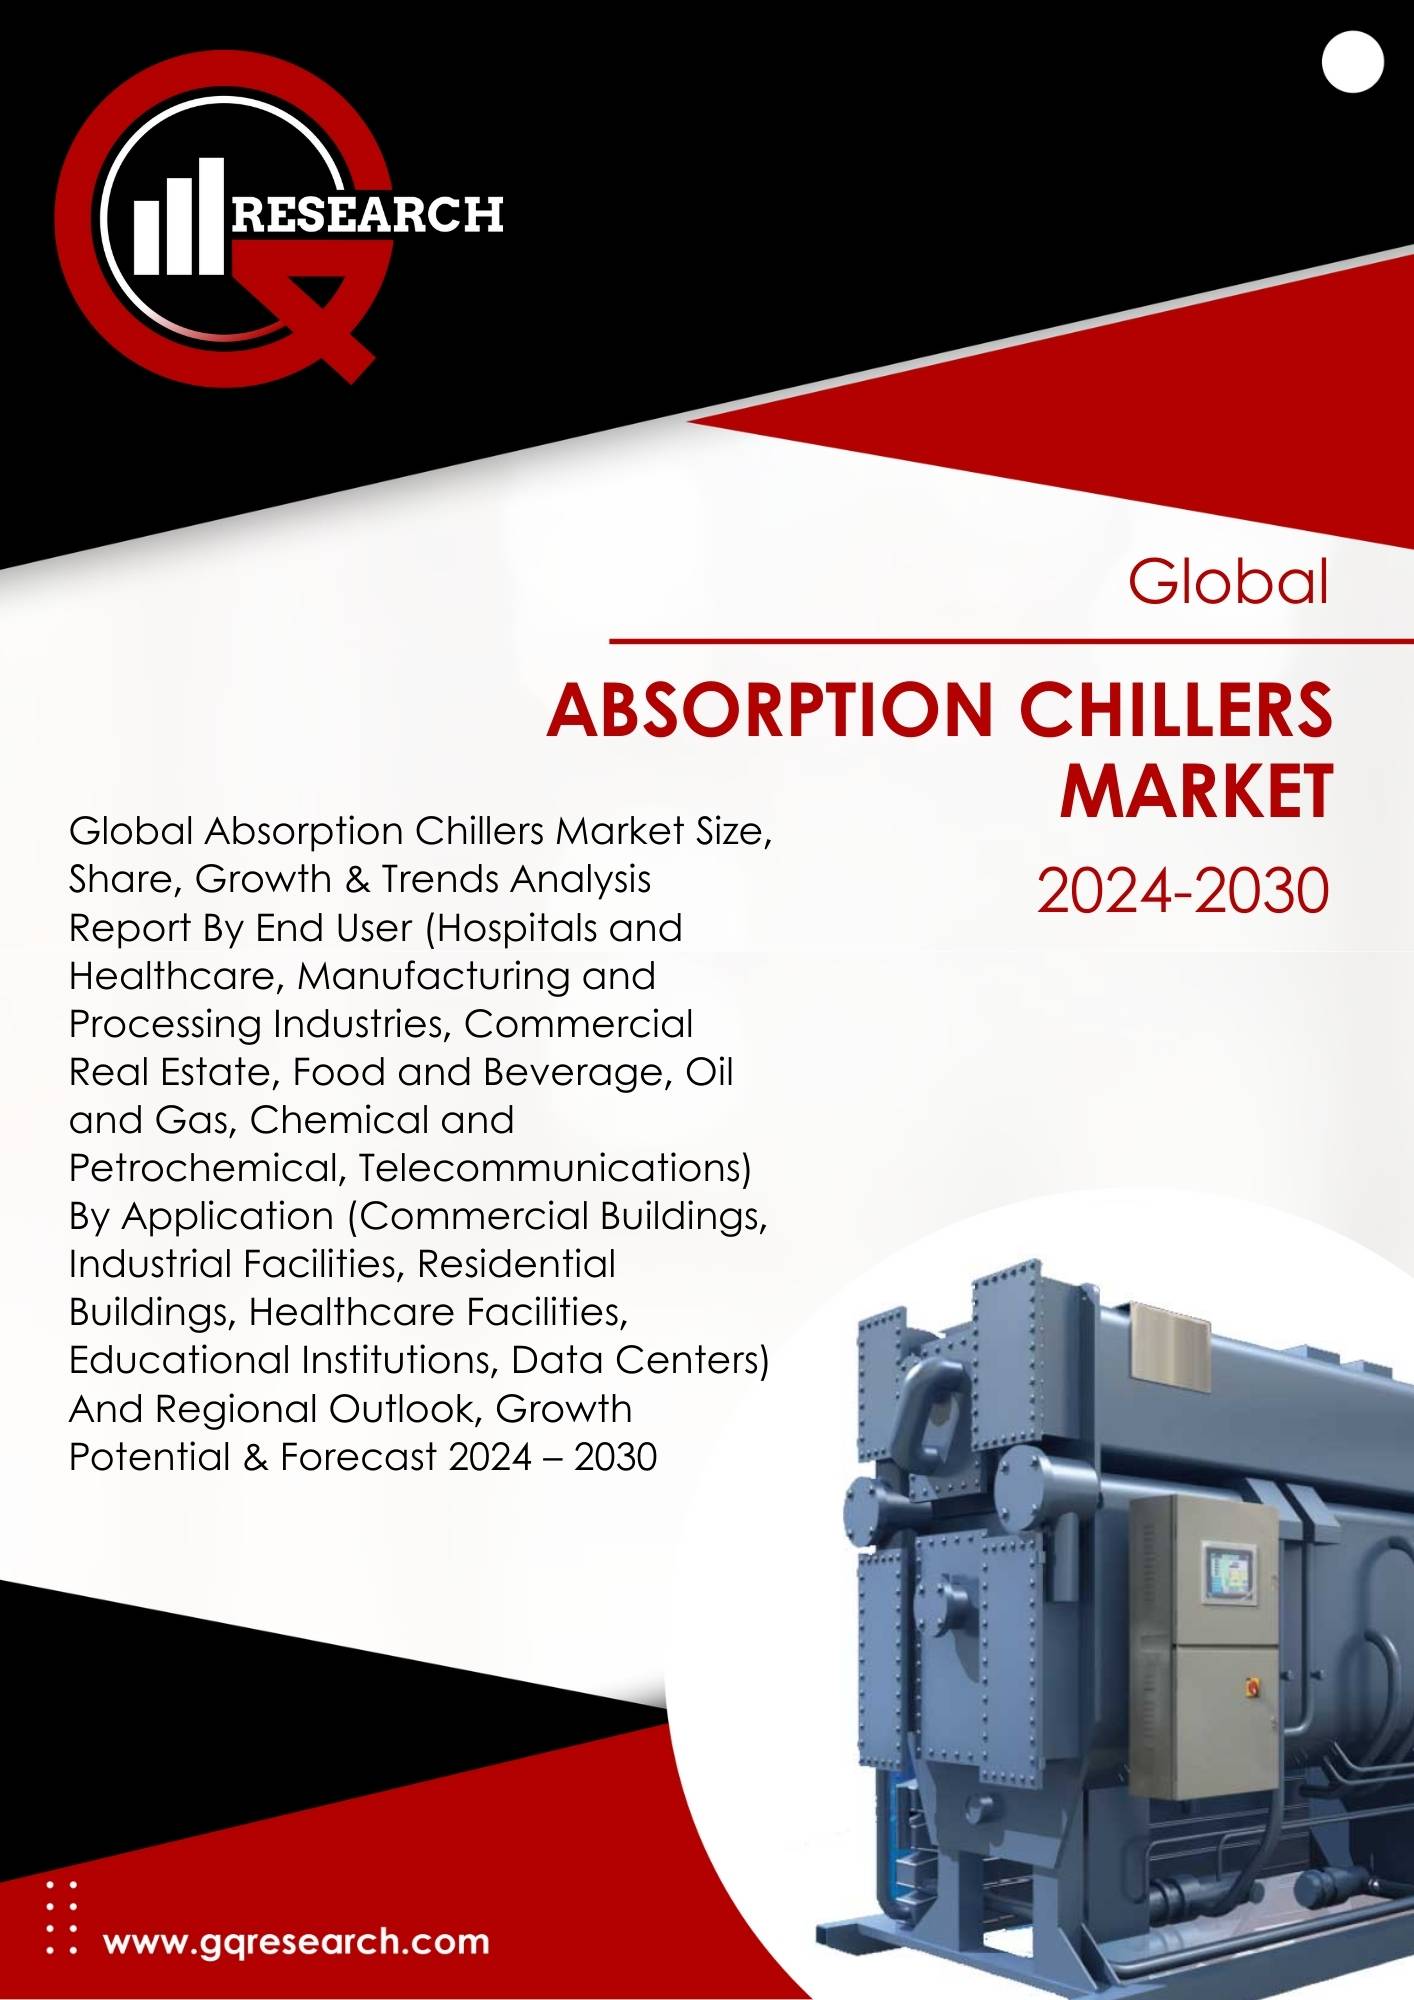 Absorption Chillers Market Growth Analysis, Share, Size and Forecast to 2030 | GQ Research